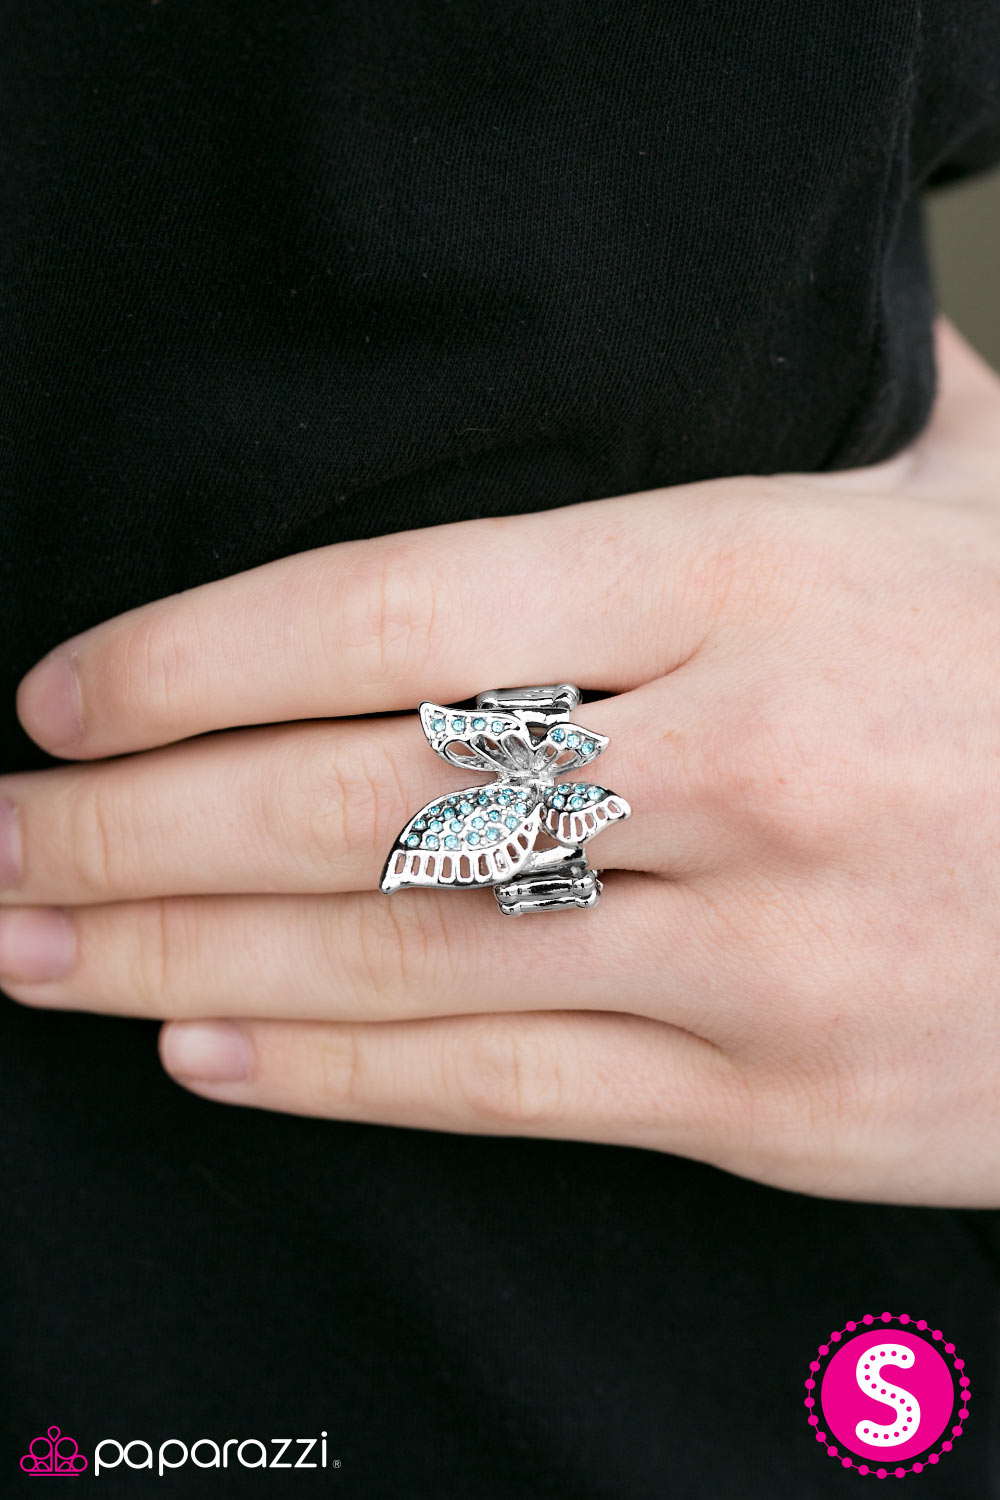 With Brave Wings She Flies - Blue - Paparazzi ring